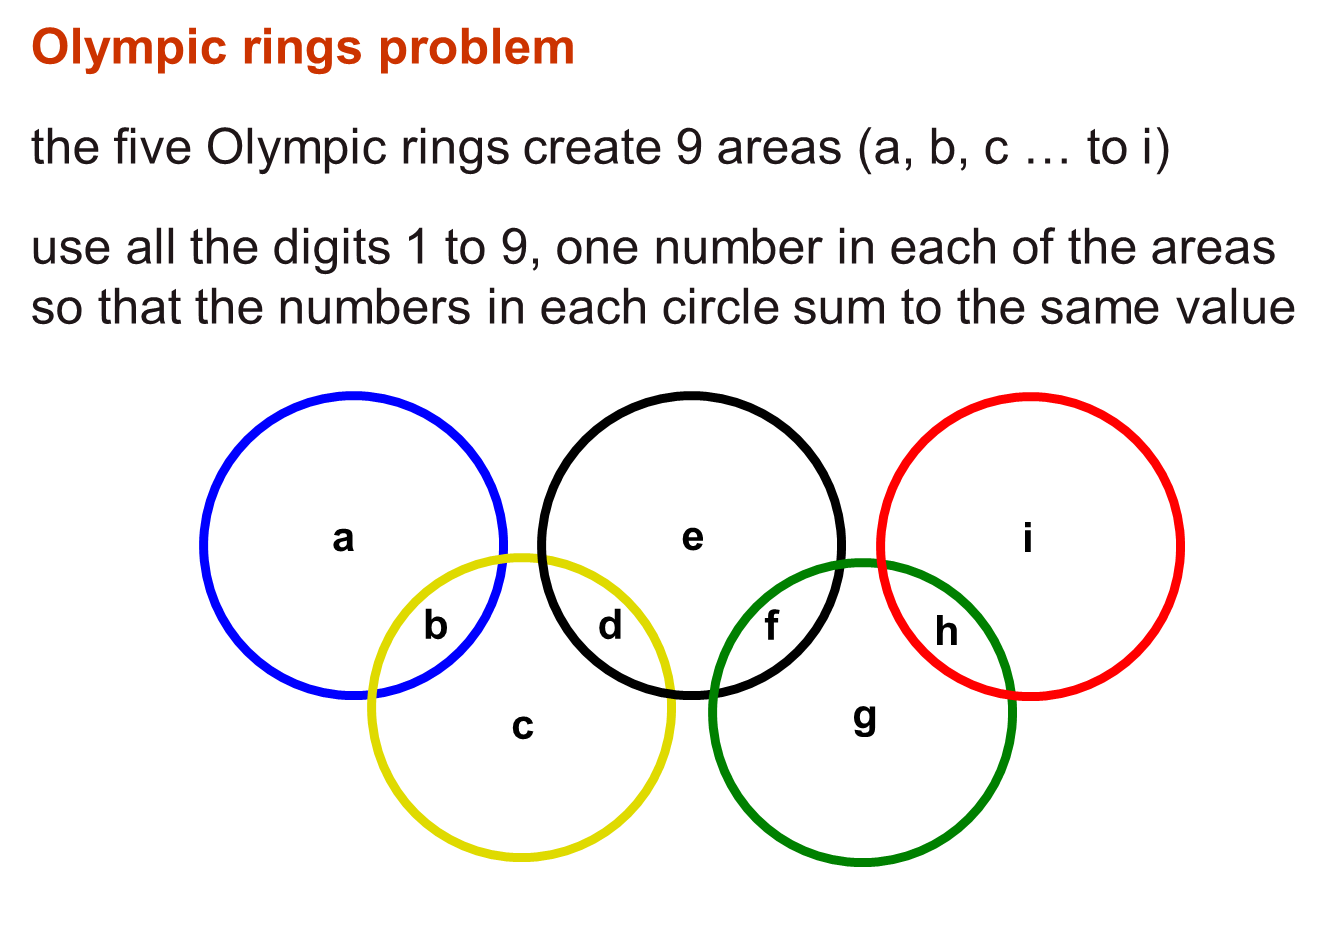 What Do the Olympic Rings and Flame Represent? | Britannica